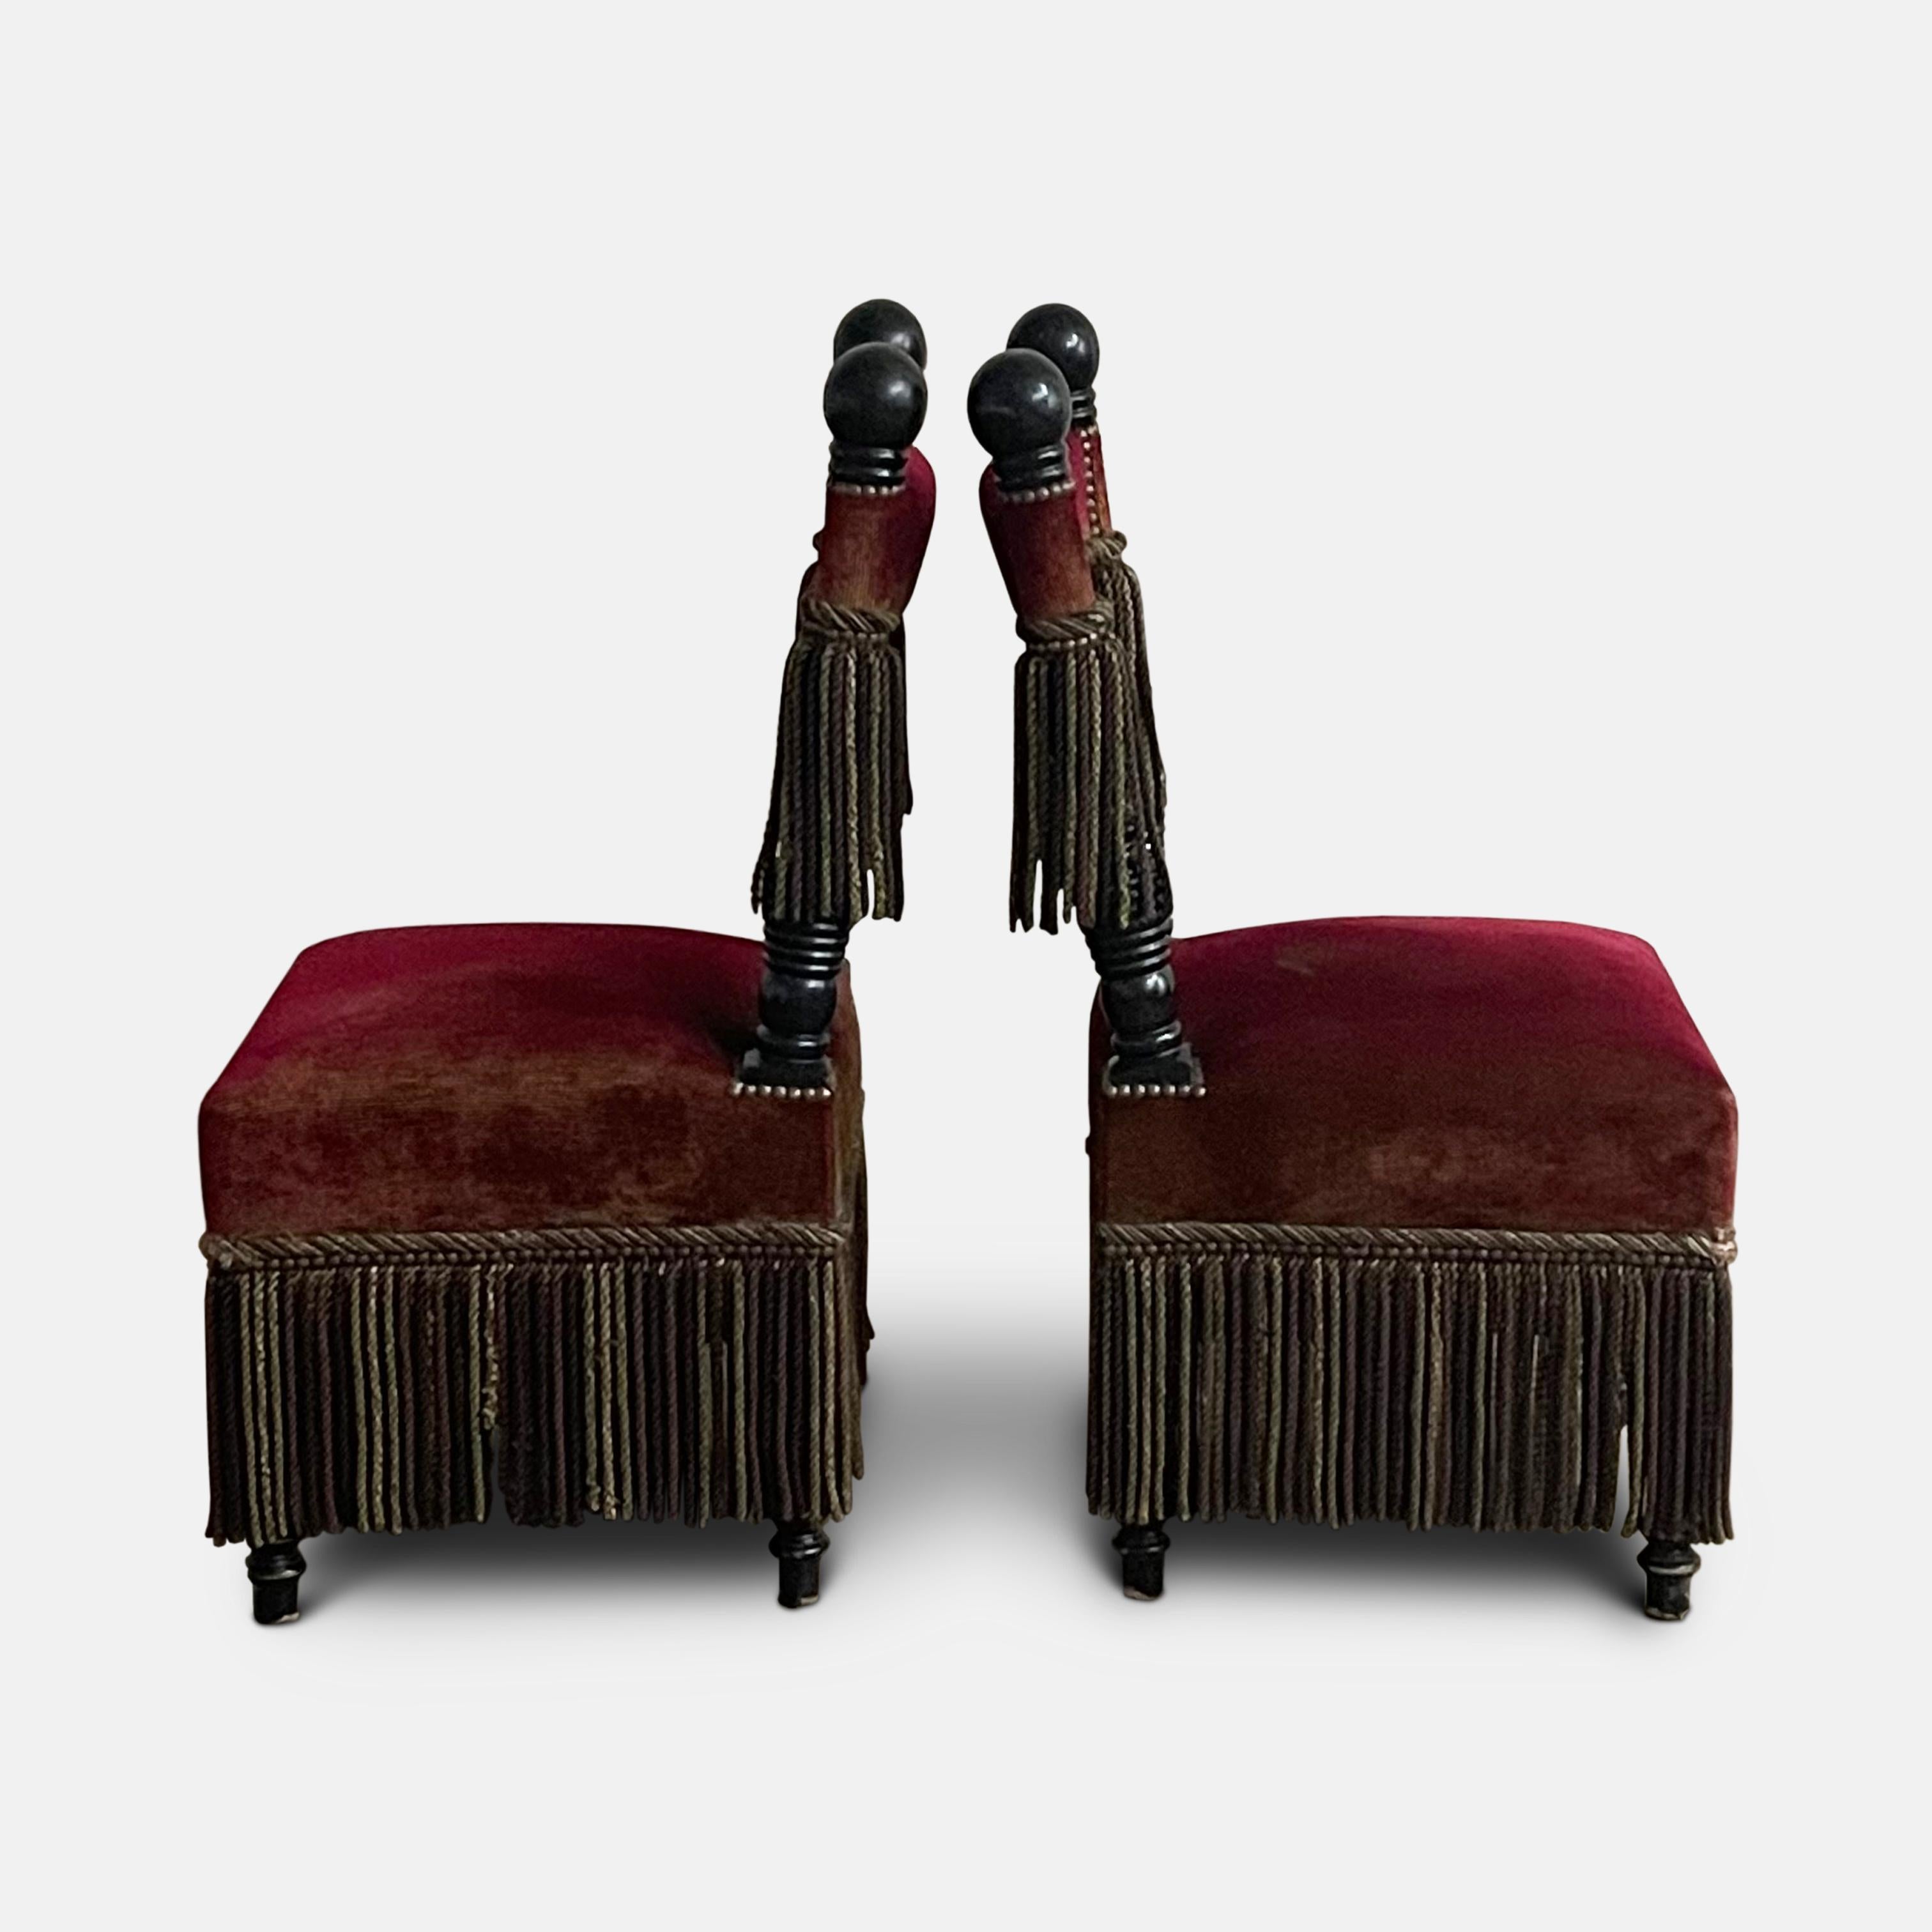 Fringed Chairs From Ladurée Patisserie In Good Condition For Sale In London, GB